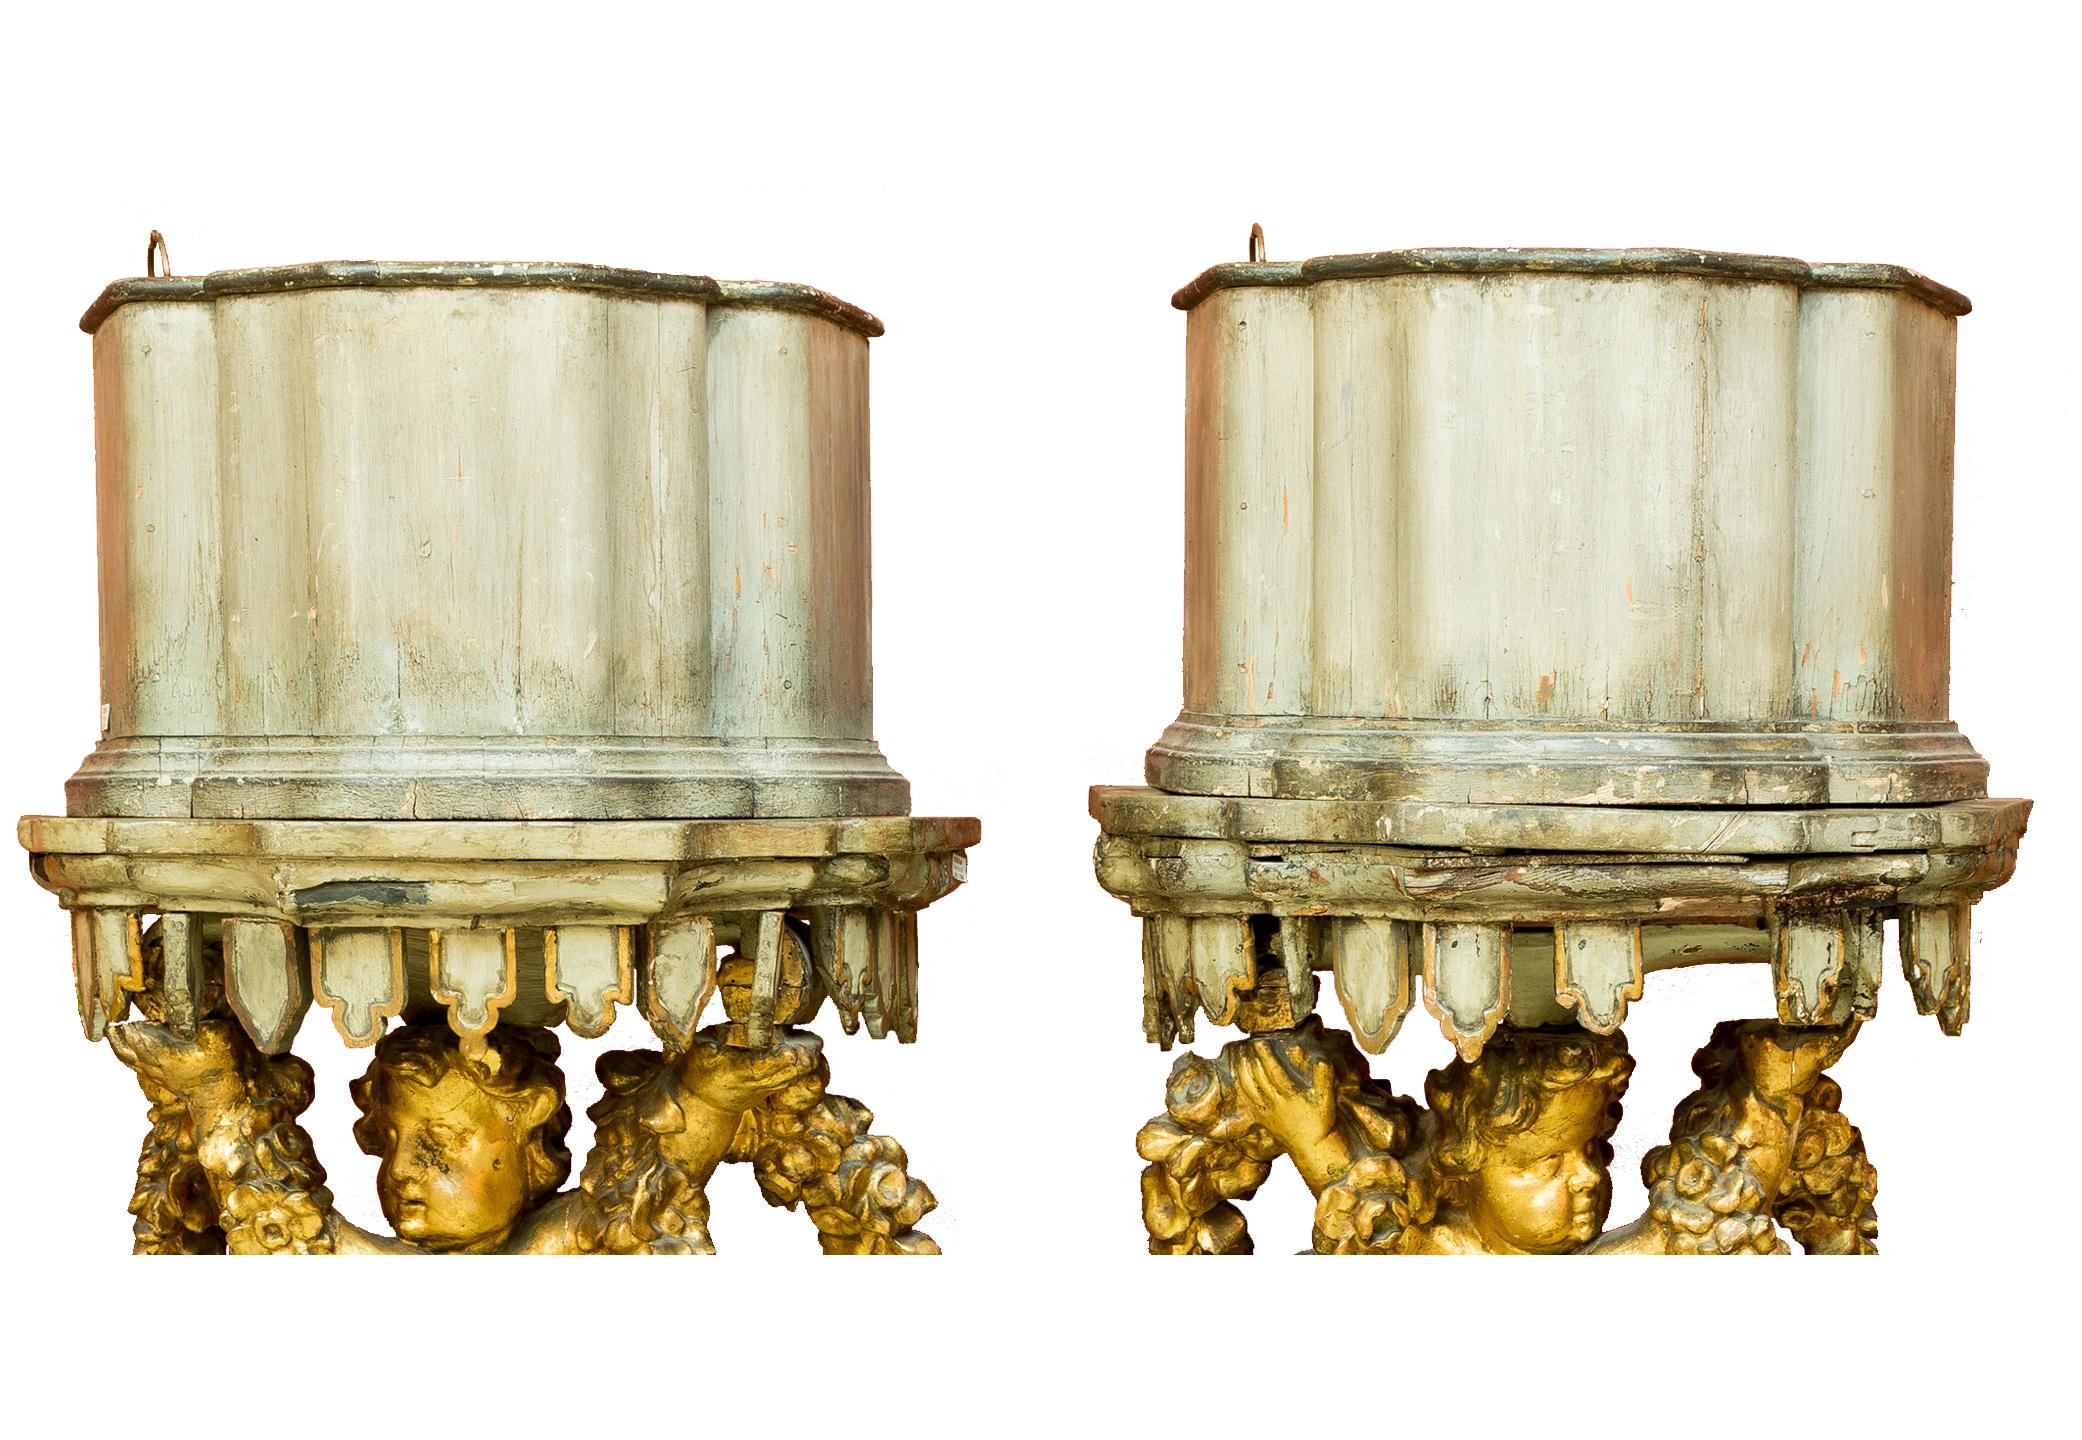 Hand-Painted Pair of Italian Baroque Style Planter Pedestals, 19th Century